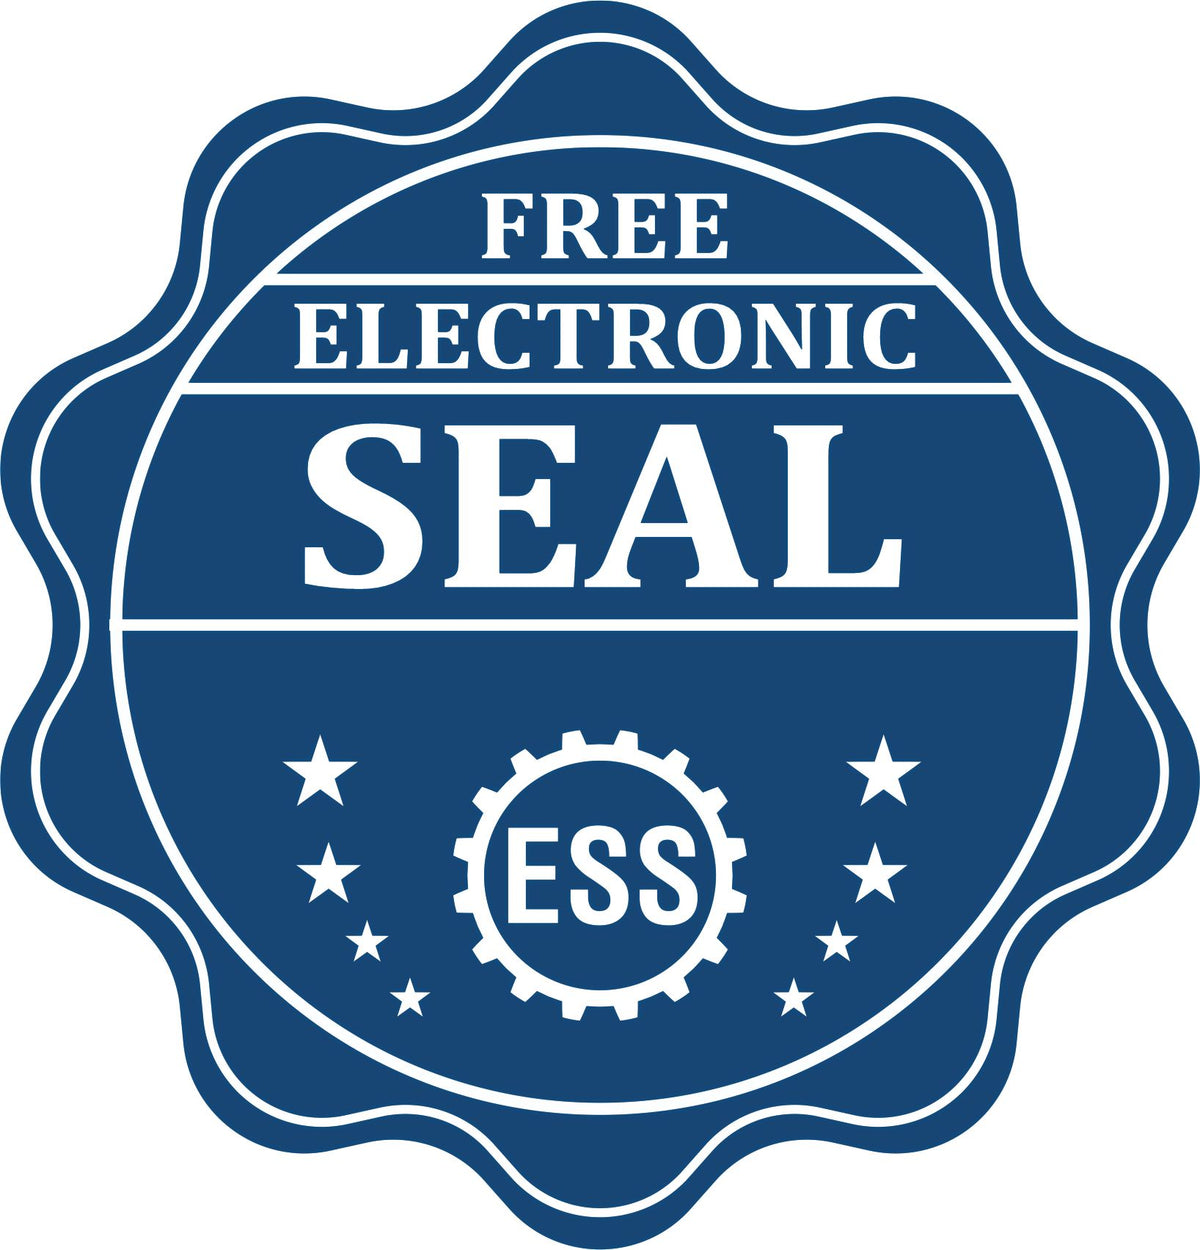 A badge showing a free electronic seal for the Premium MaxLight Pre-Inked Arkansas Engineering Stamp with stars and the ESS gear on the emblem.